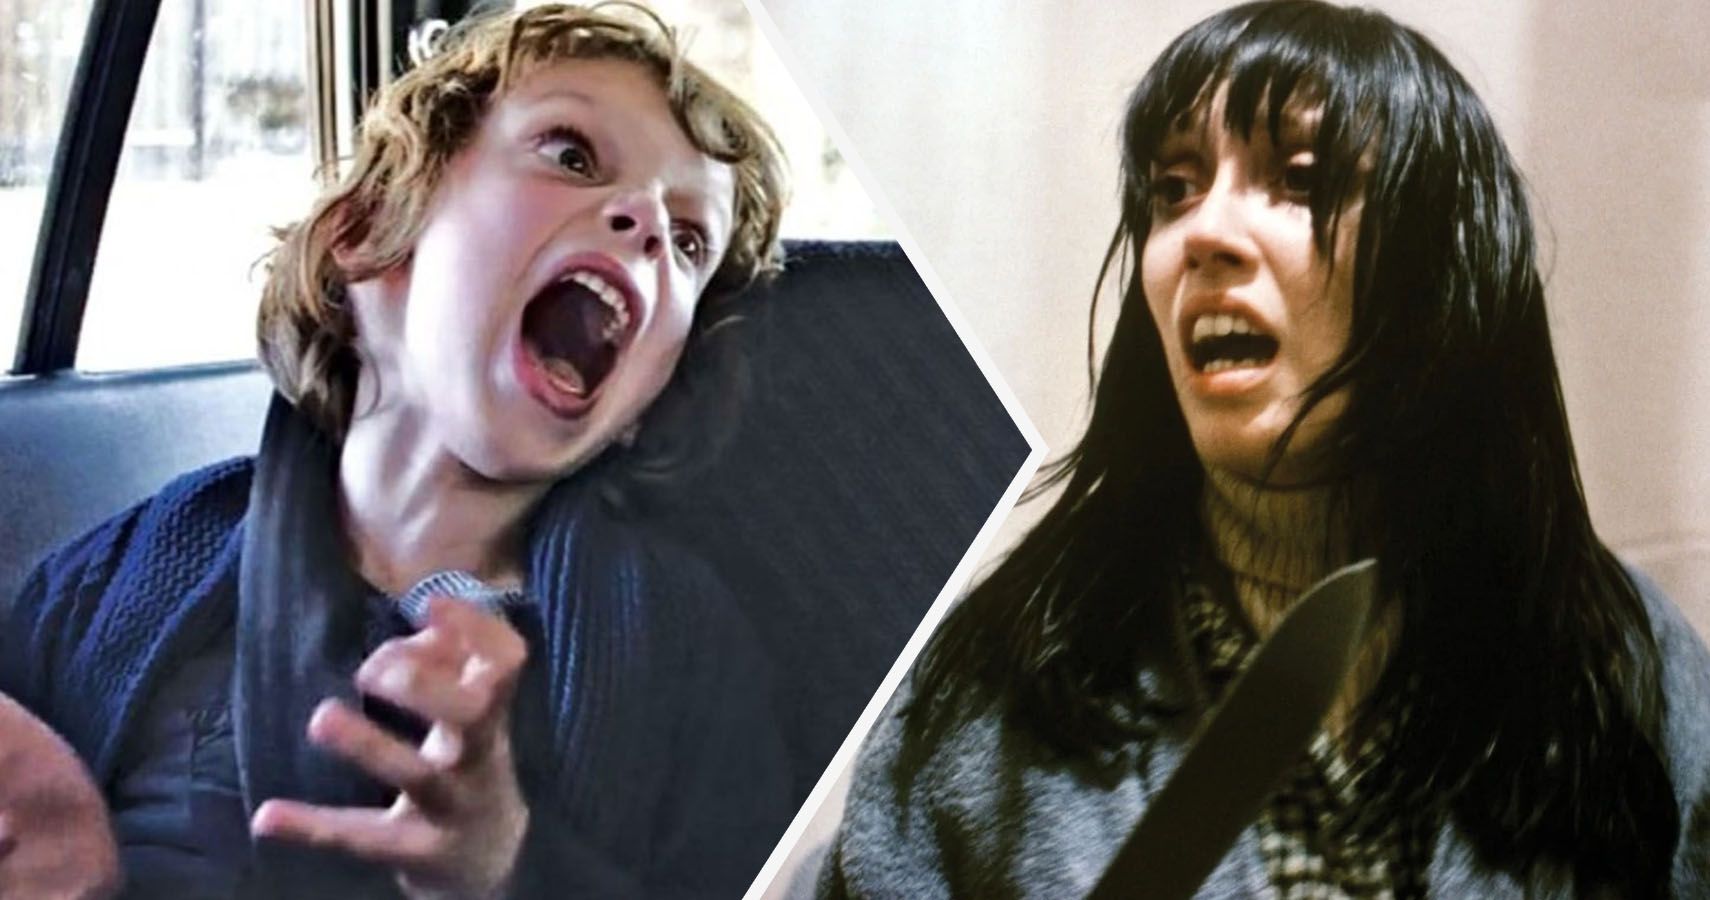 Annoying Horror Movie Characters Babadook And The Shining